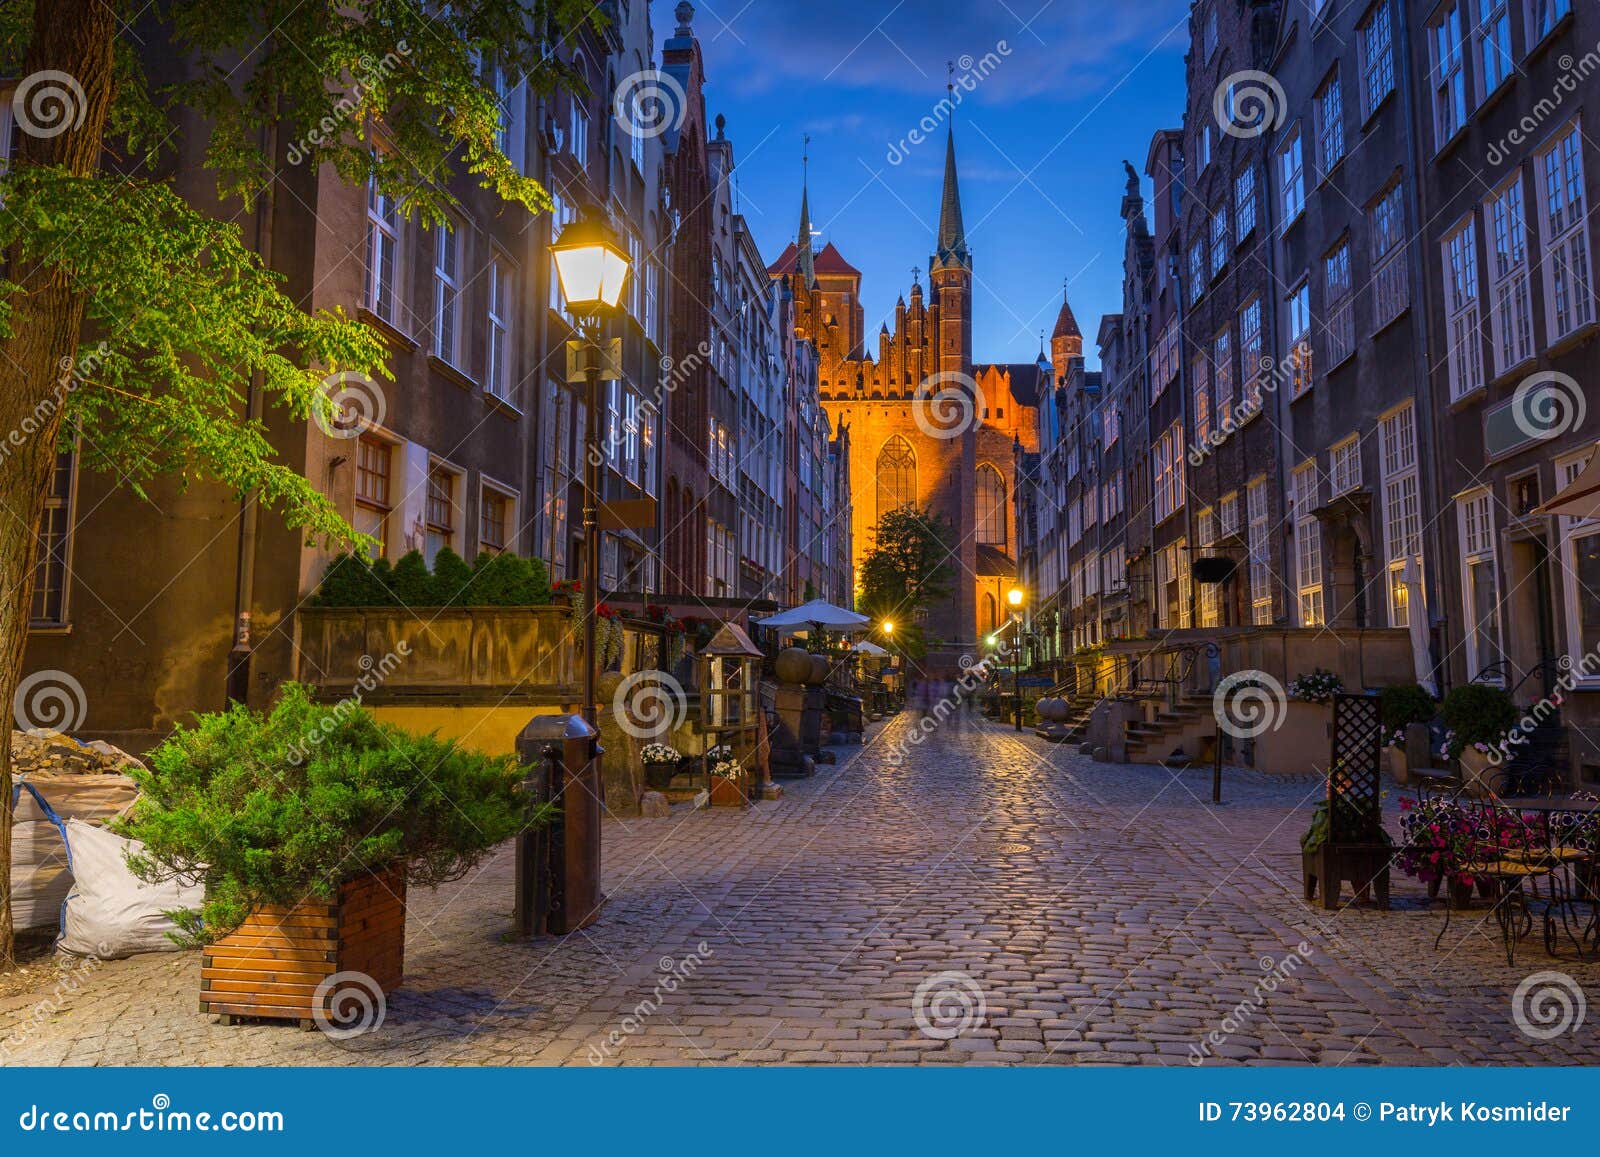 beautiful architecture of mariacka street in gdansk